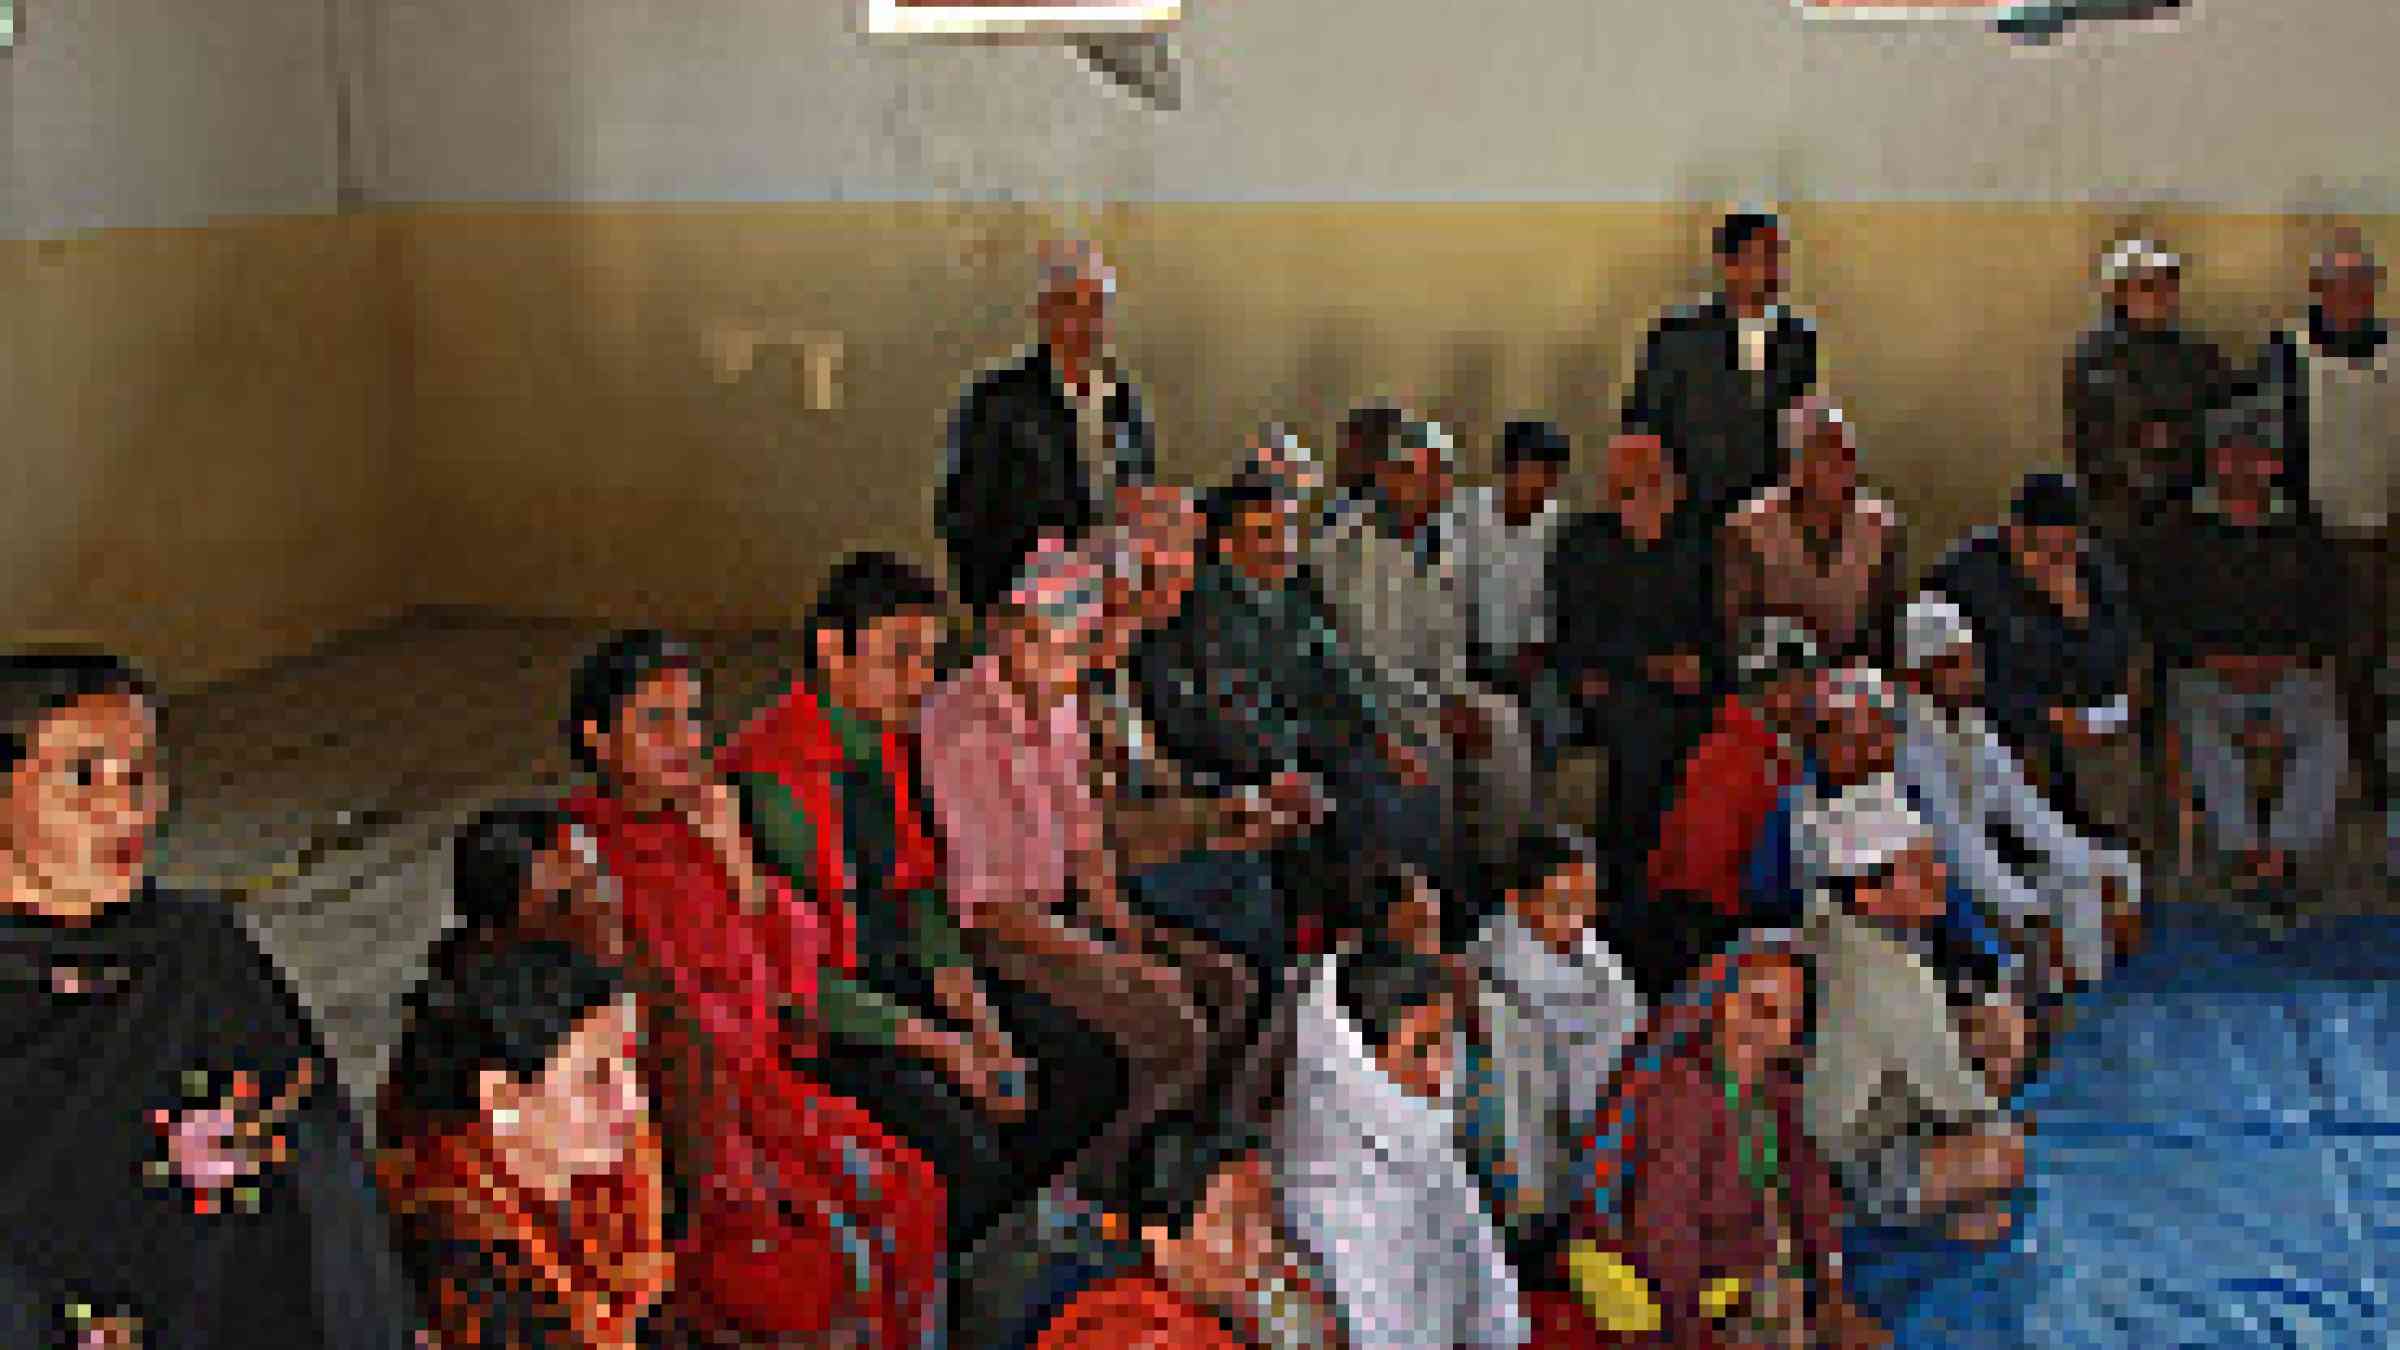 Photo of a community meeting in Kaski, Nepal, copyright the World Bank